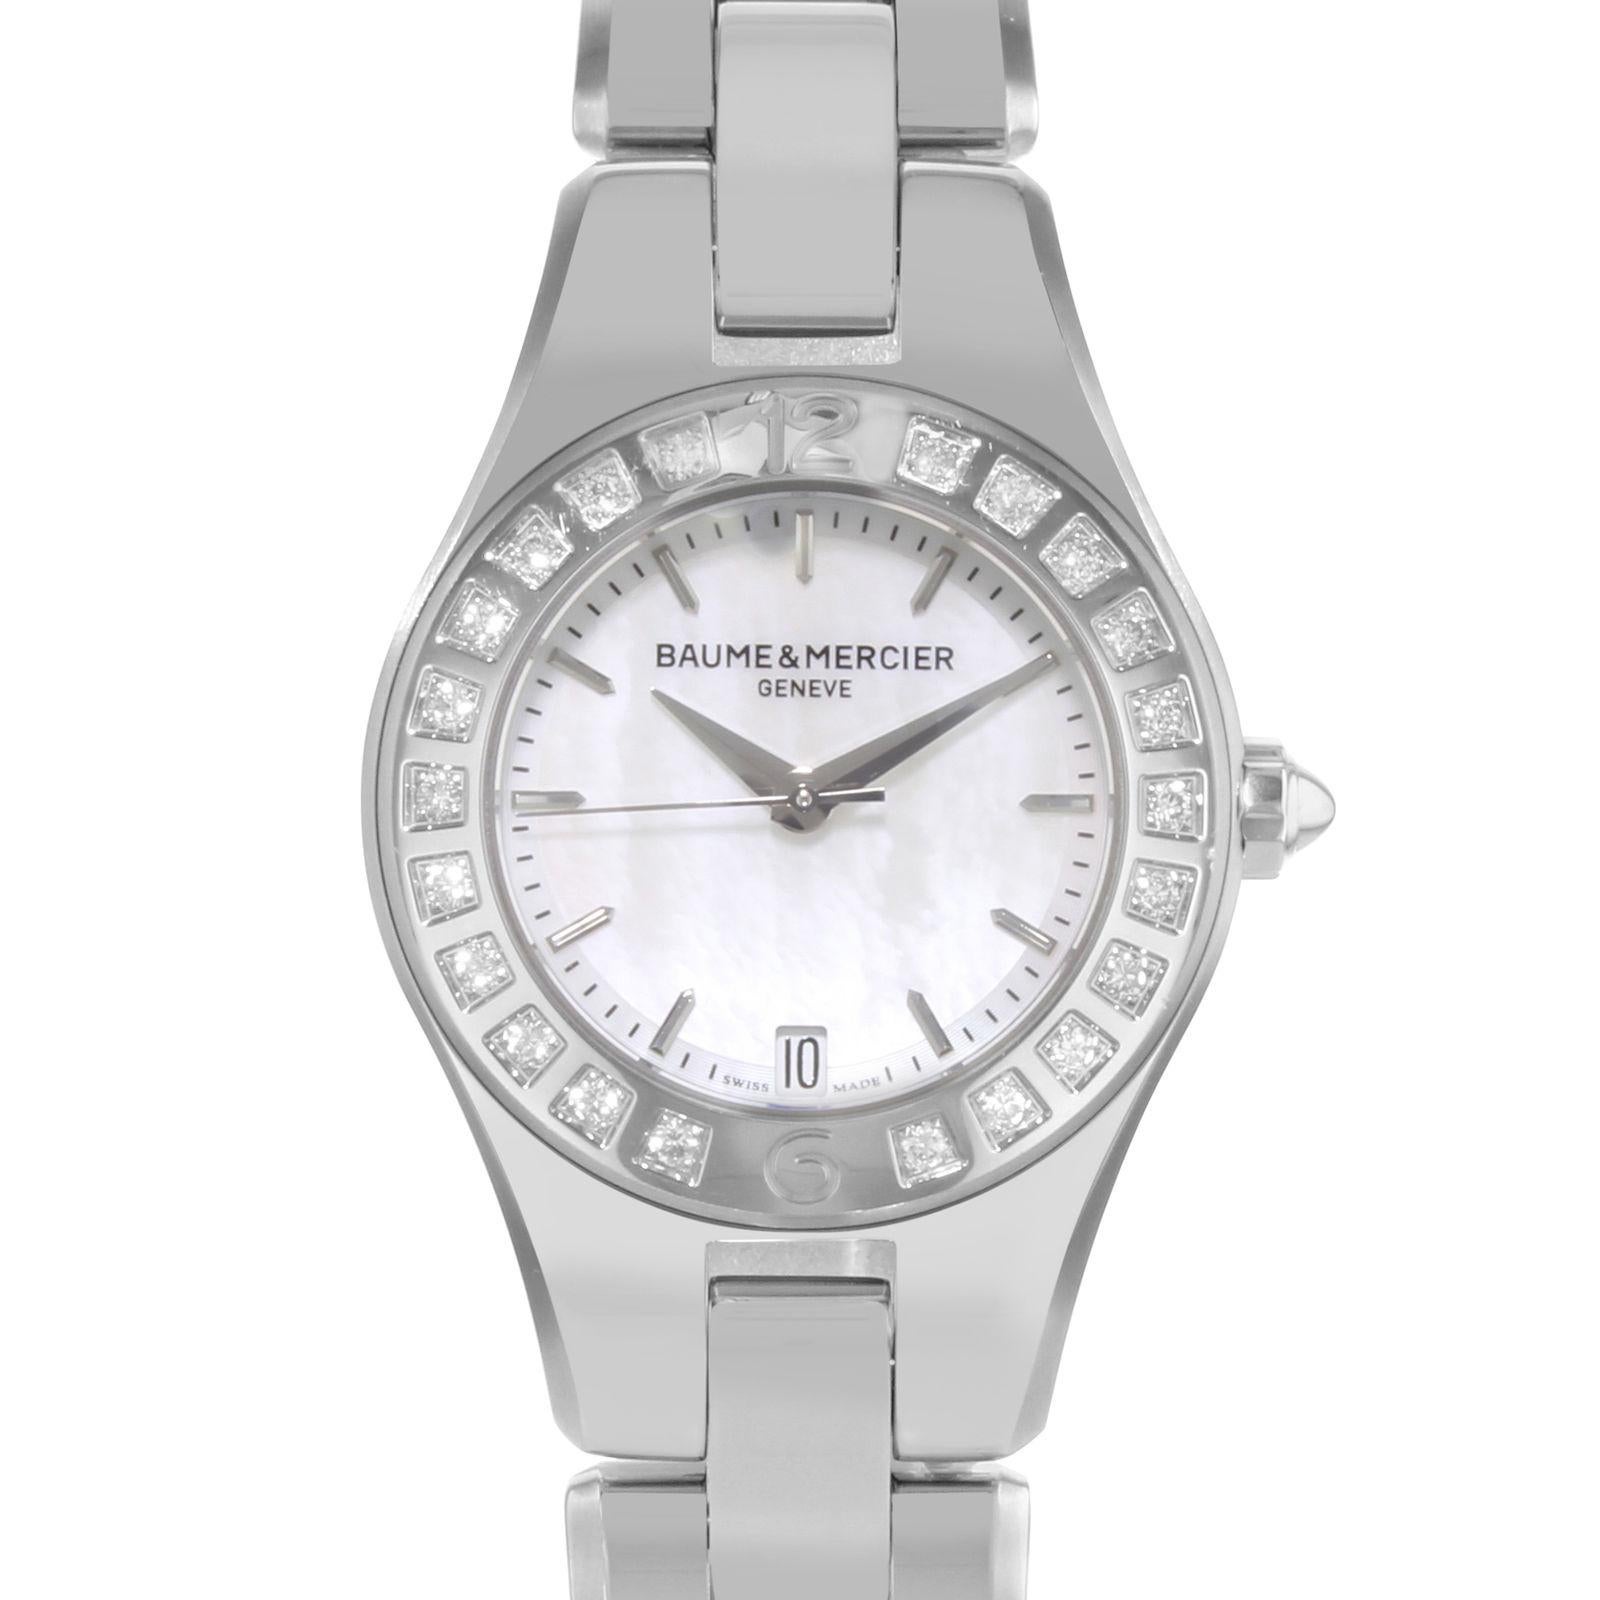 (17246)
This never been worn Baume et Mercier Linea MOA10078 is a beautiful Ladies timepiece that is powered by a quartz movement which is cased in a stainless steel case. It has a round shape face, date dial and has hand sticks style markers. It is